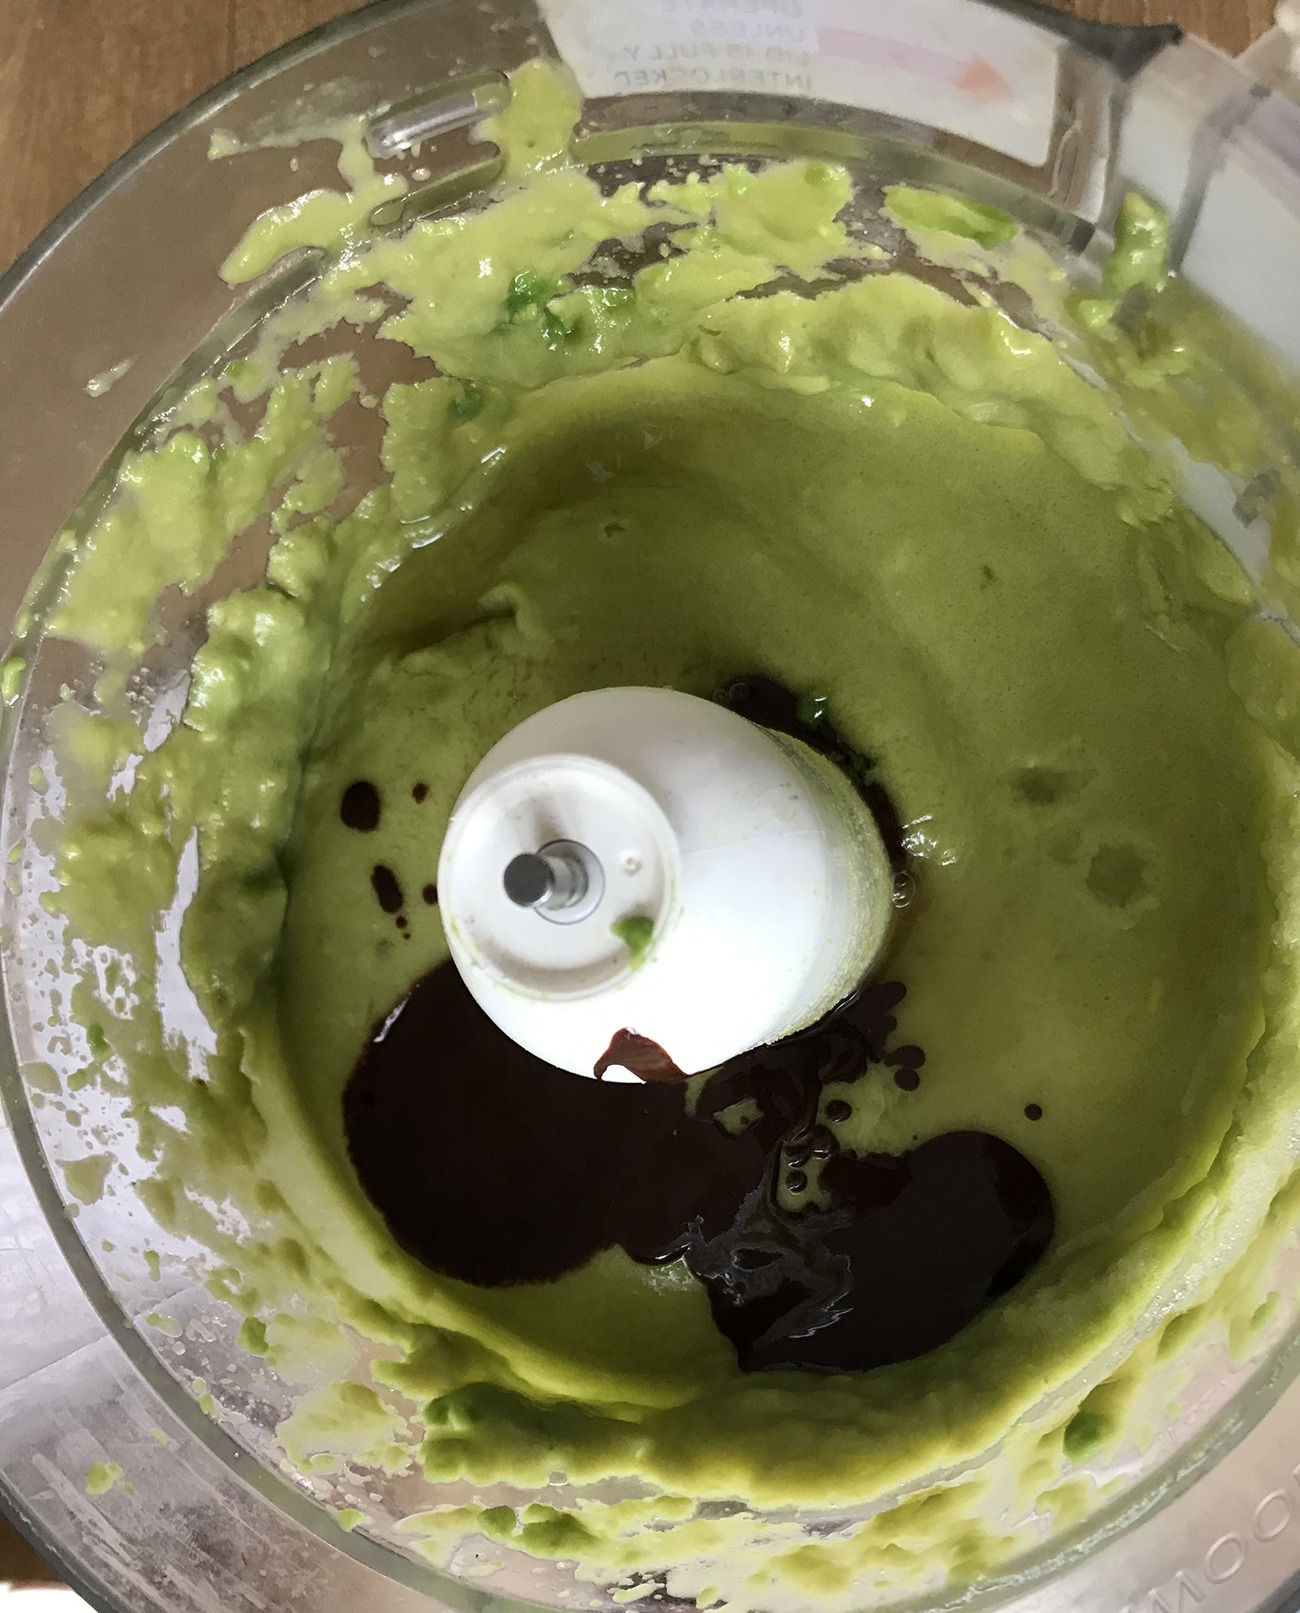 Add the melted chocolate mixture to the avocado mixture and keep mixing.